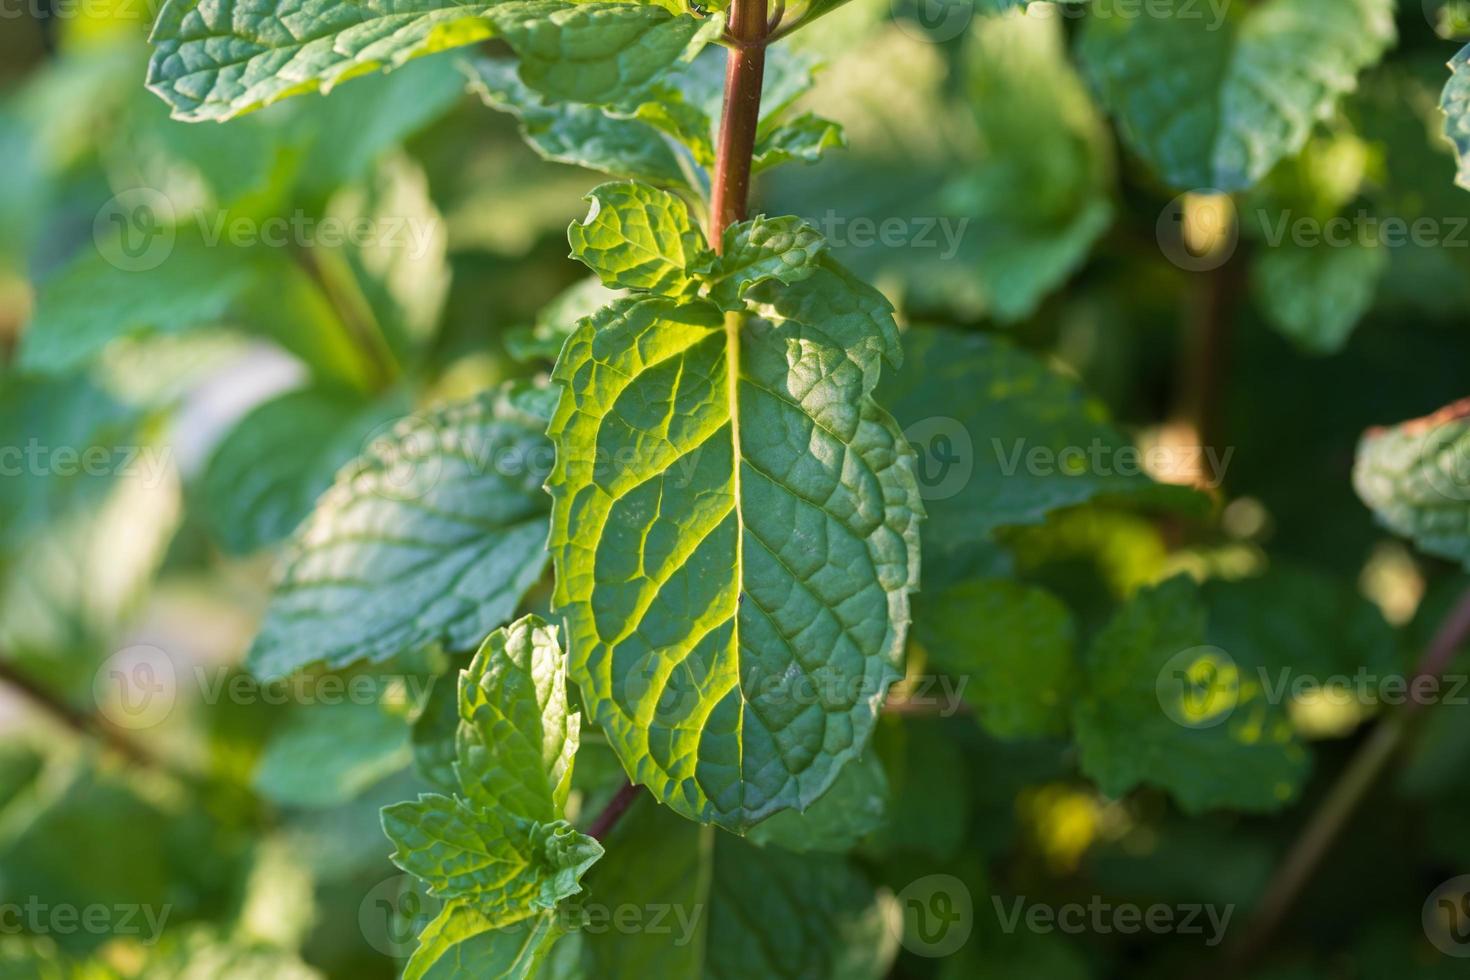 Mint plants grow at the vegetable garden. photo